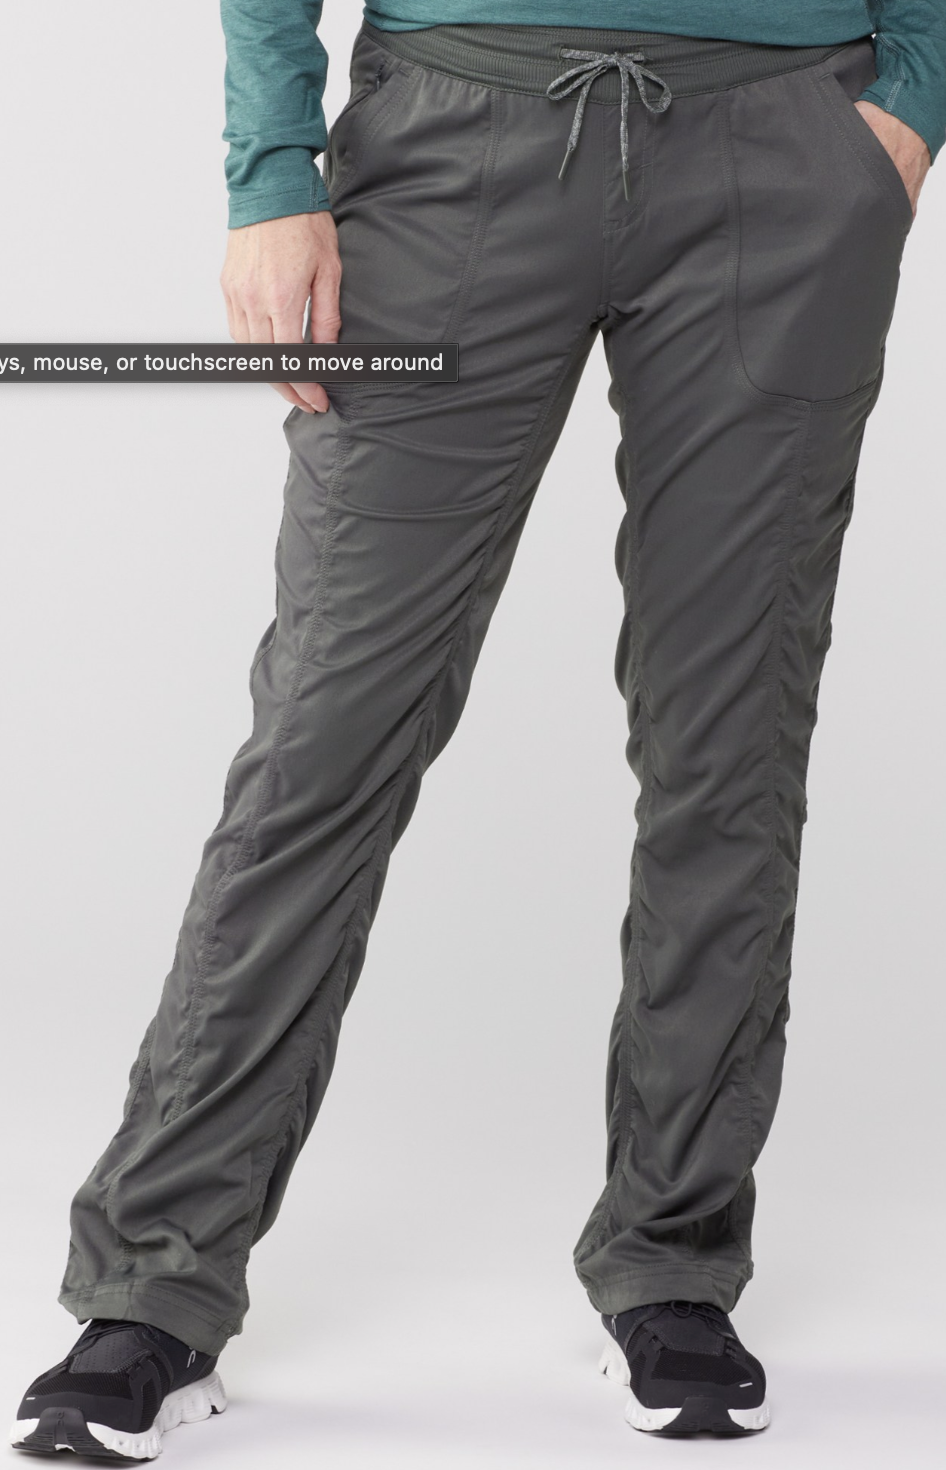 The North Face Aphrodite 2.0 Pants